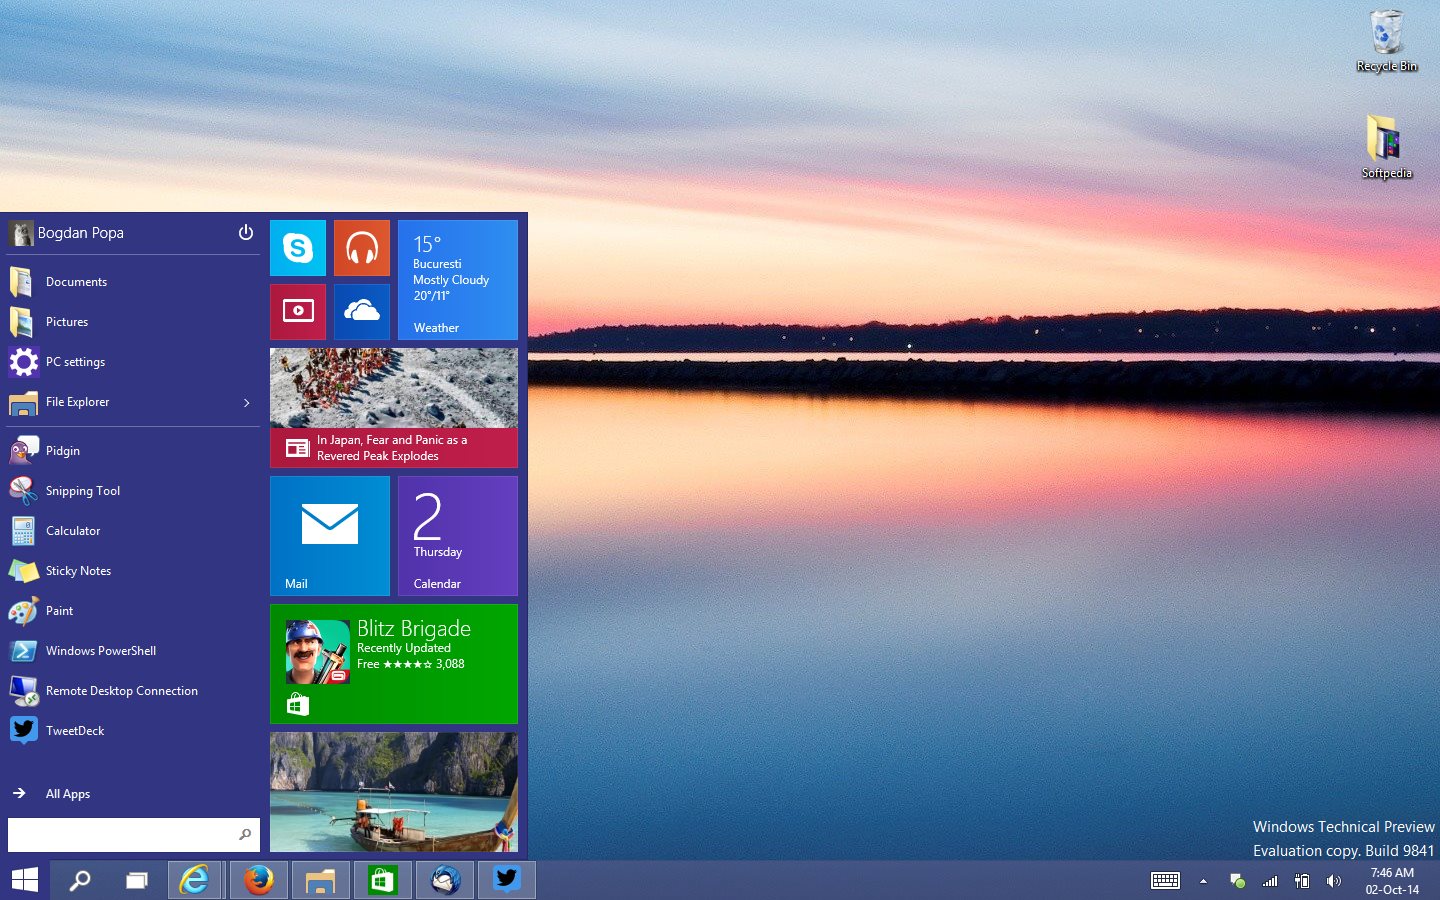 Windows 10 Preview Start Menu Look and Features